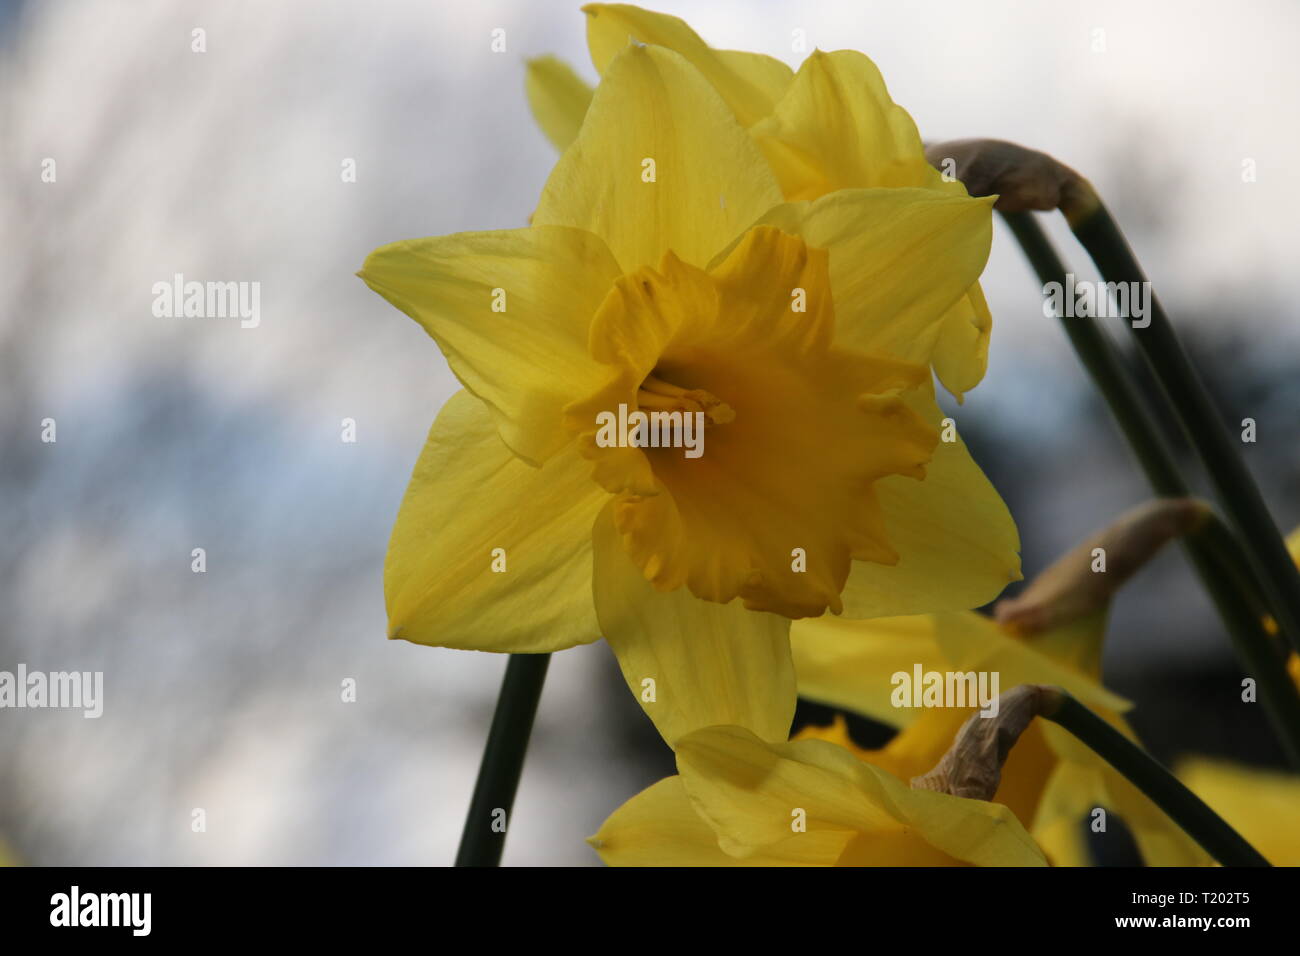 Fiori Gialli Tipi.Yellow Flowers Named Narcissus Or Daffodil In The Grass In The